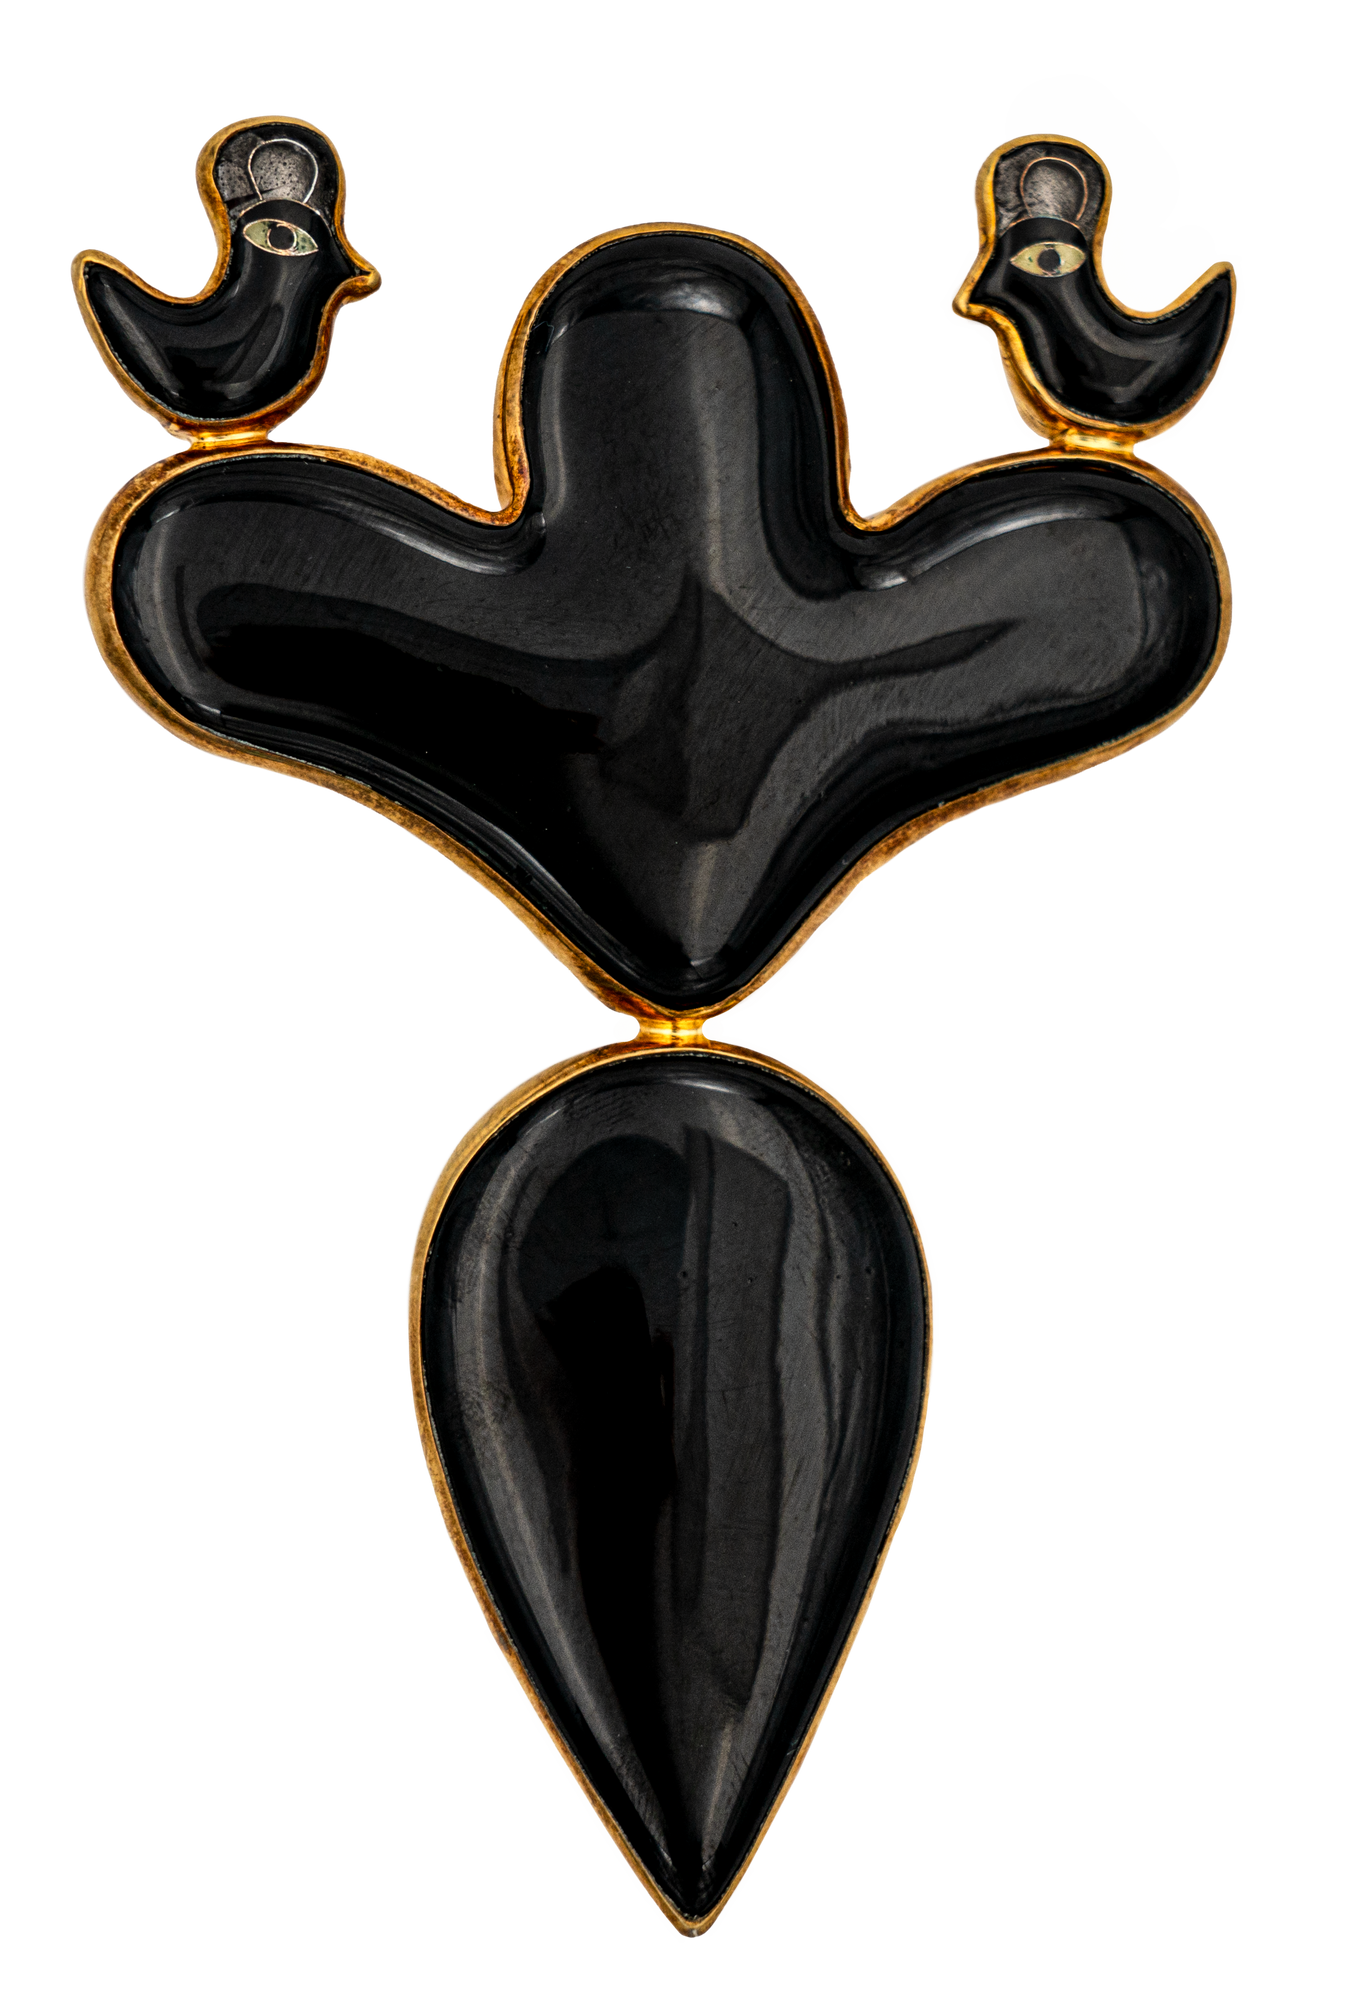 Black broach pendant done in the cloisonné enamelling technique in several parts: one abstract tree-like figure with two birds perched on each side and one tear drop shape all encased with fine gold metal.